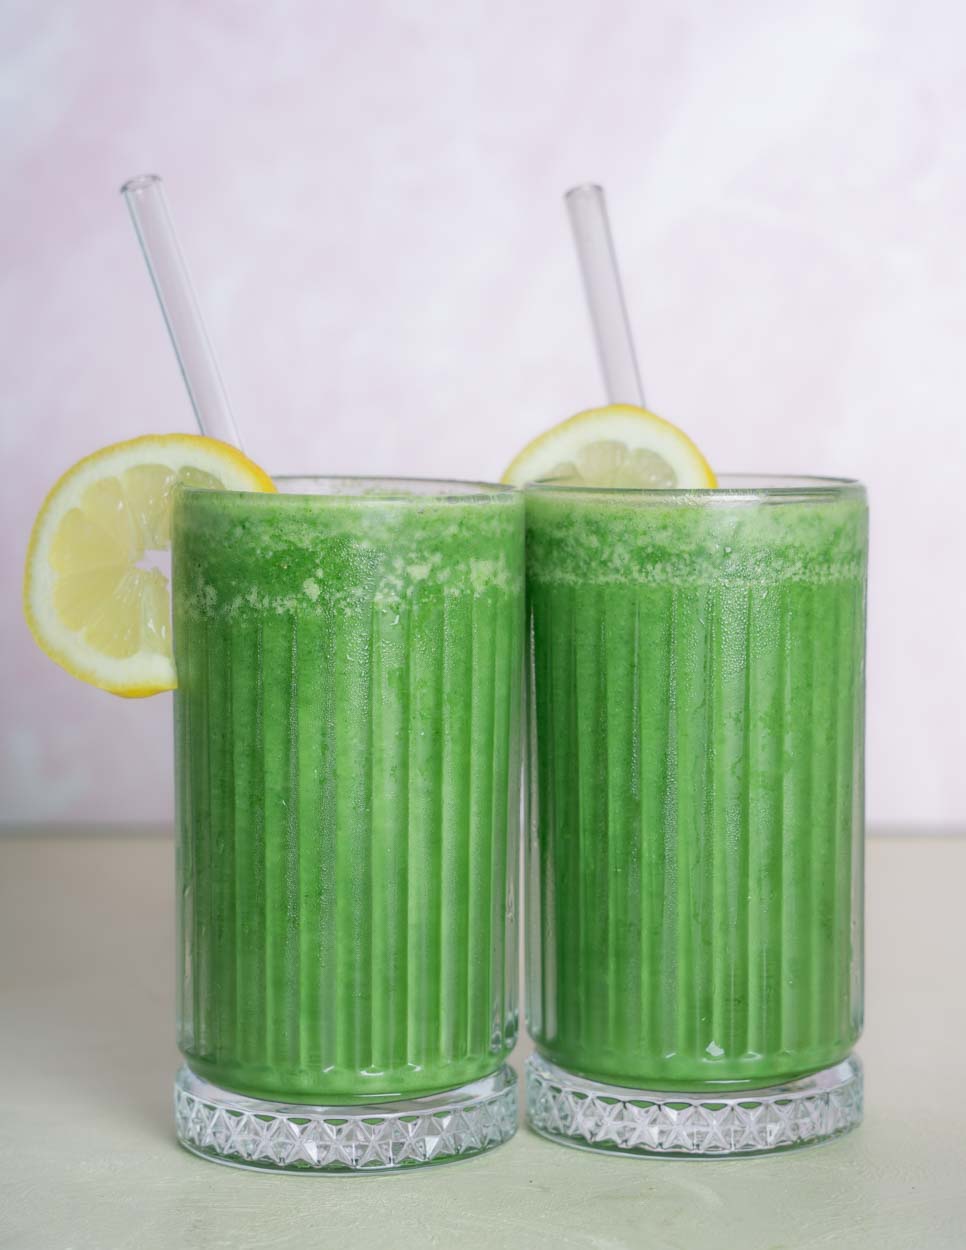 Two glasses of green smoothies with a slice of lemon as a garnish. Set in front of a light pink background